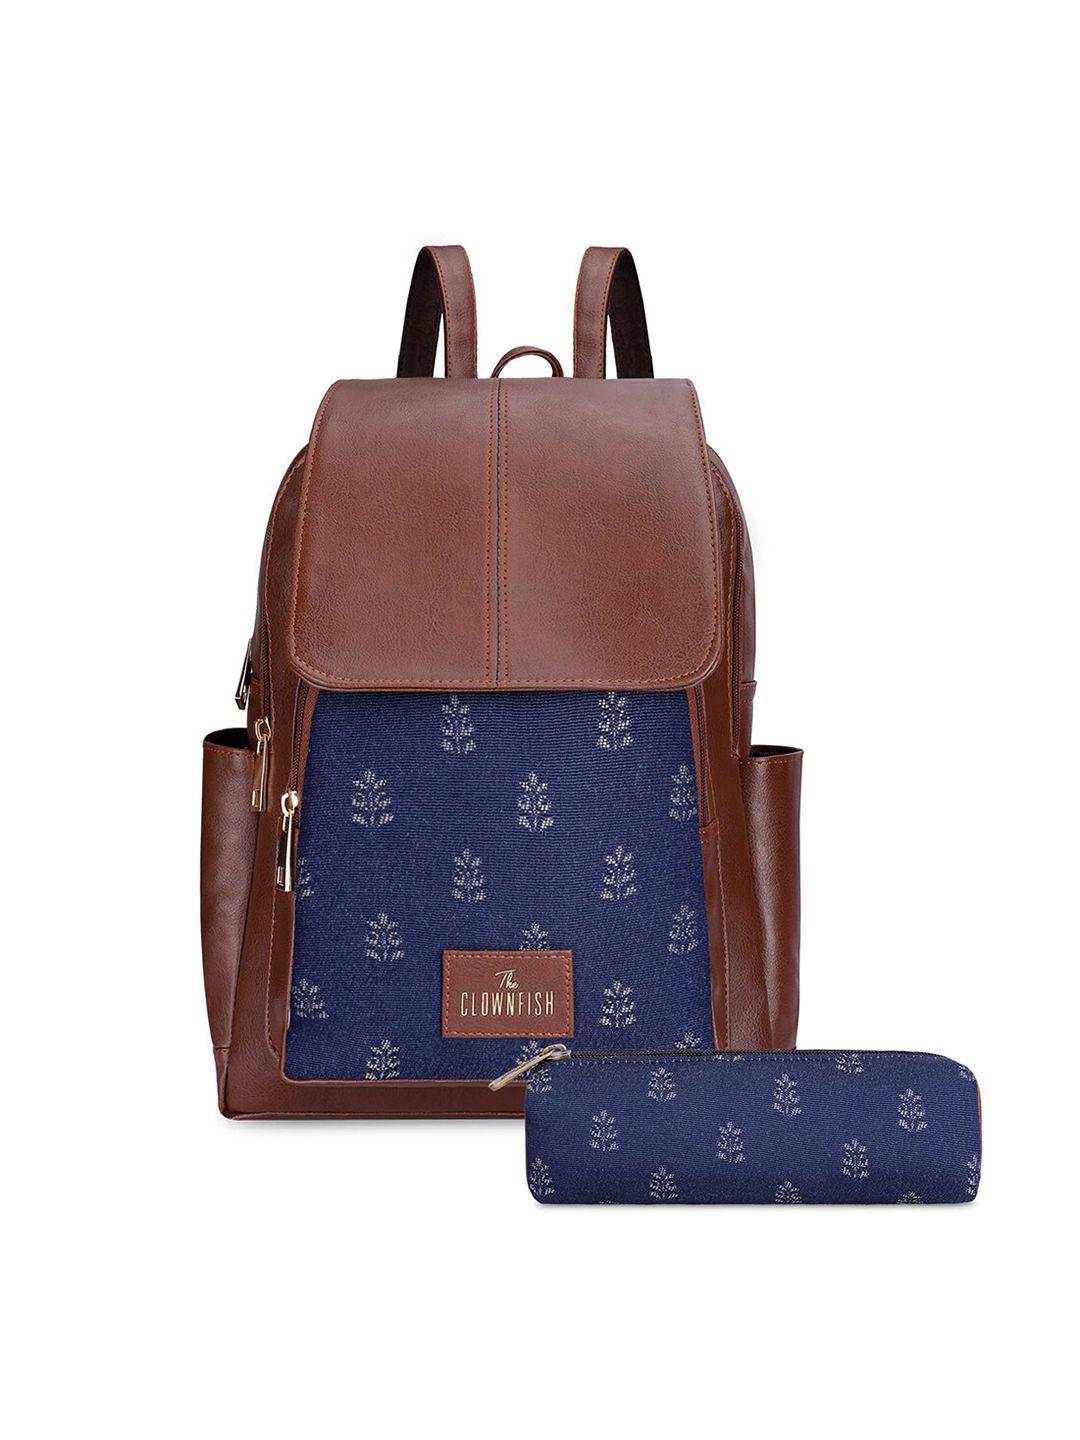 the clownfish women printed backpack with zip pouch